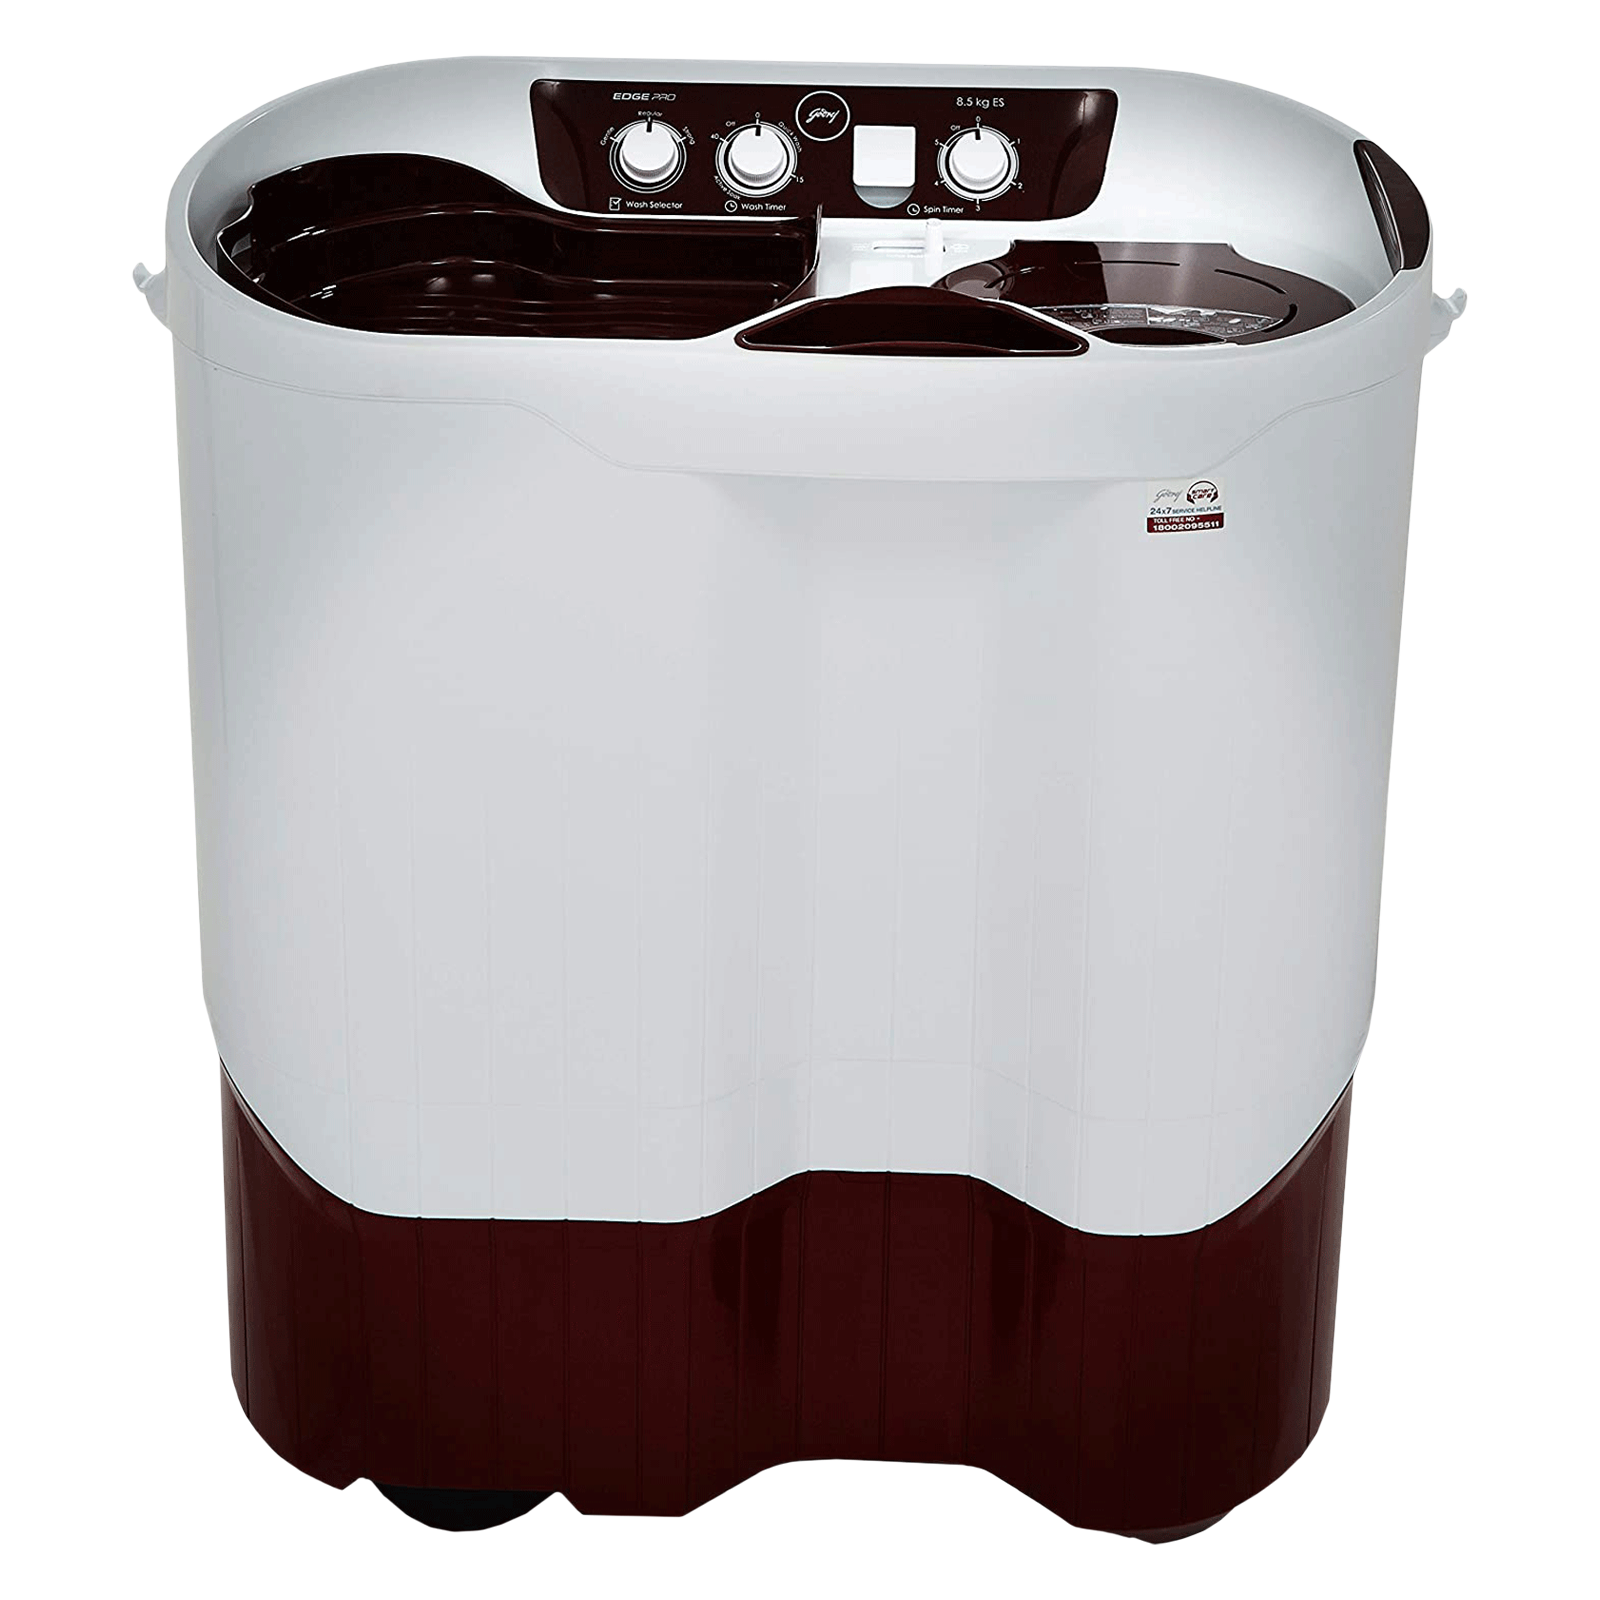 Godrej 8.5 kg 5 Star Semi Automatic Washing Machine with Spin Shower (Edge Pro, WS EDGEPRO 850 ES, Wine Red)